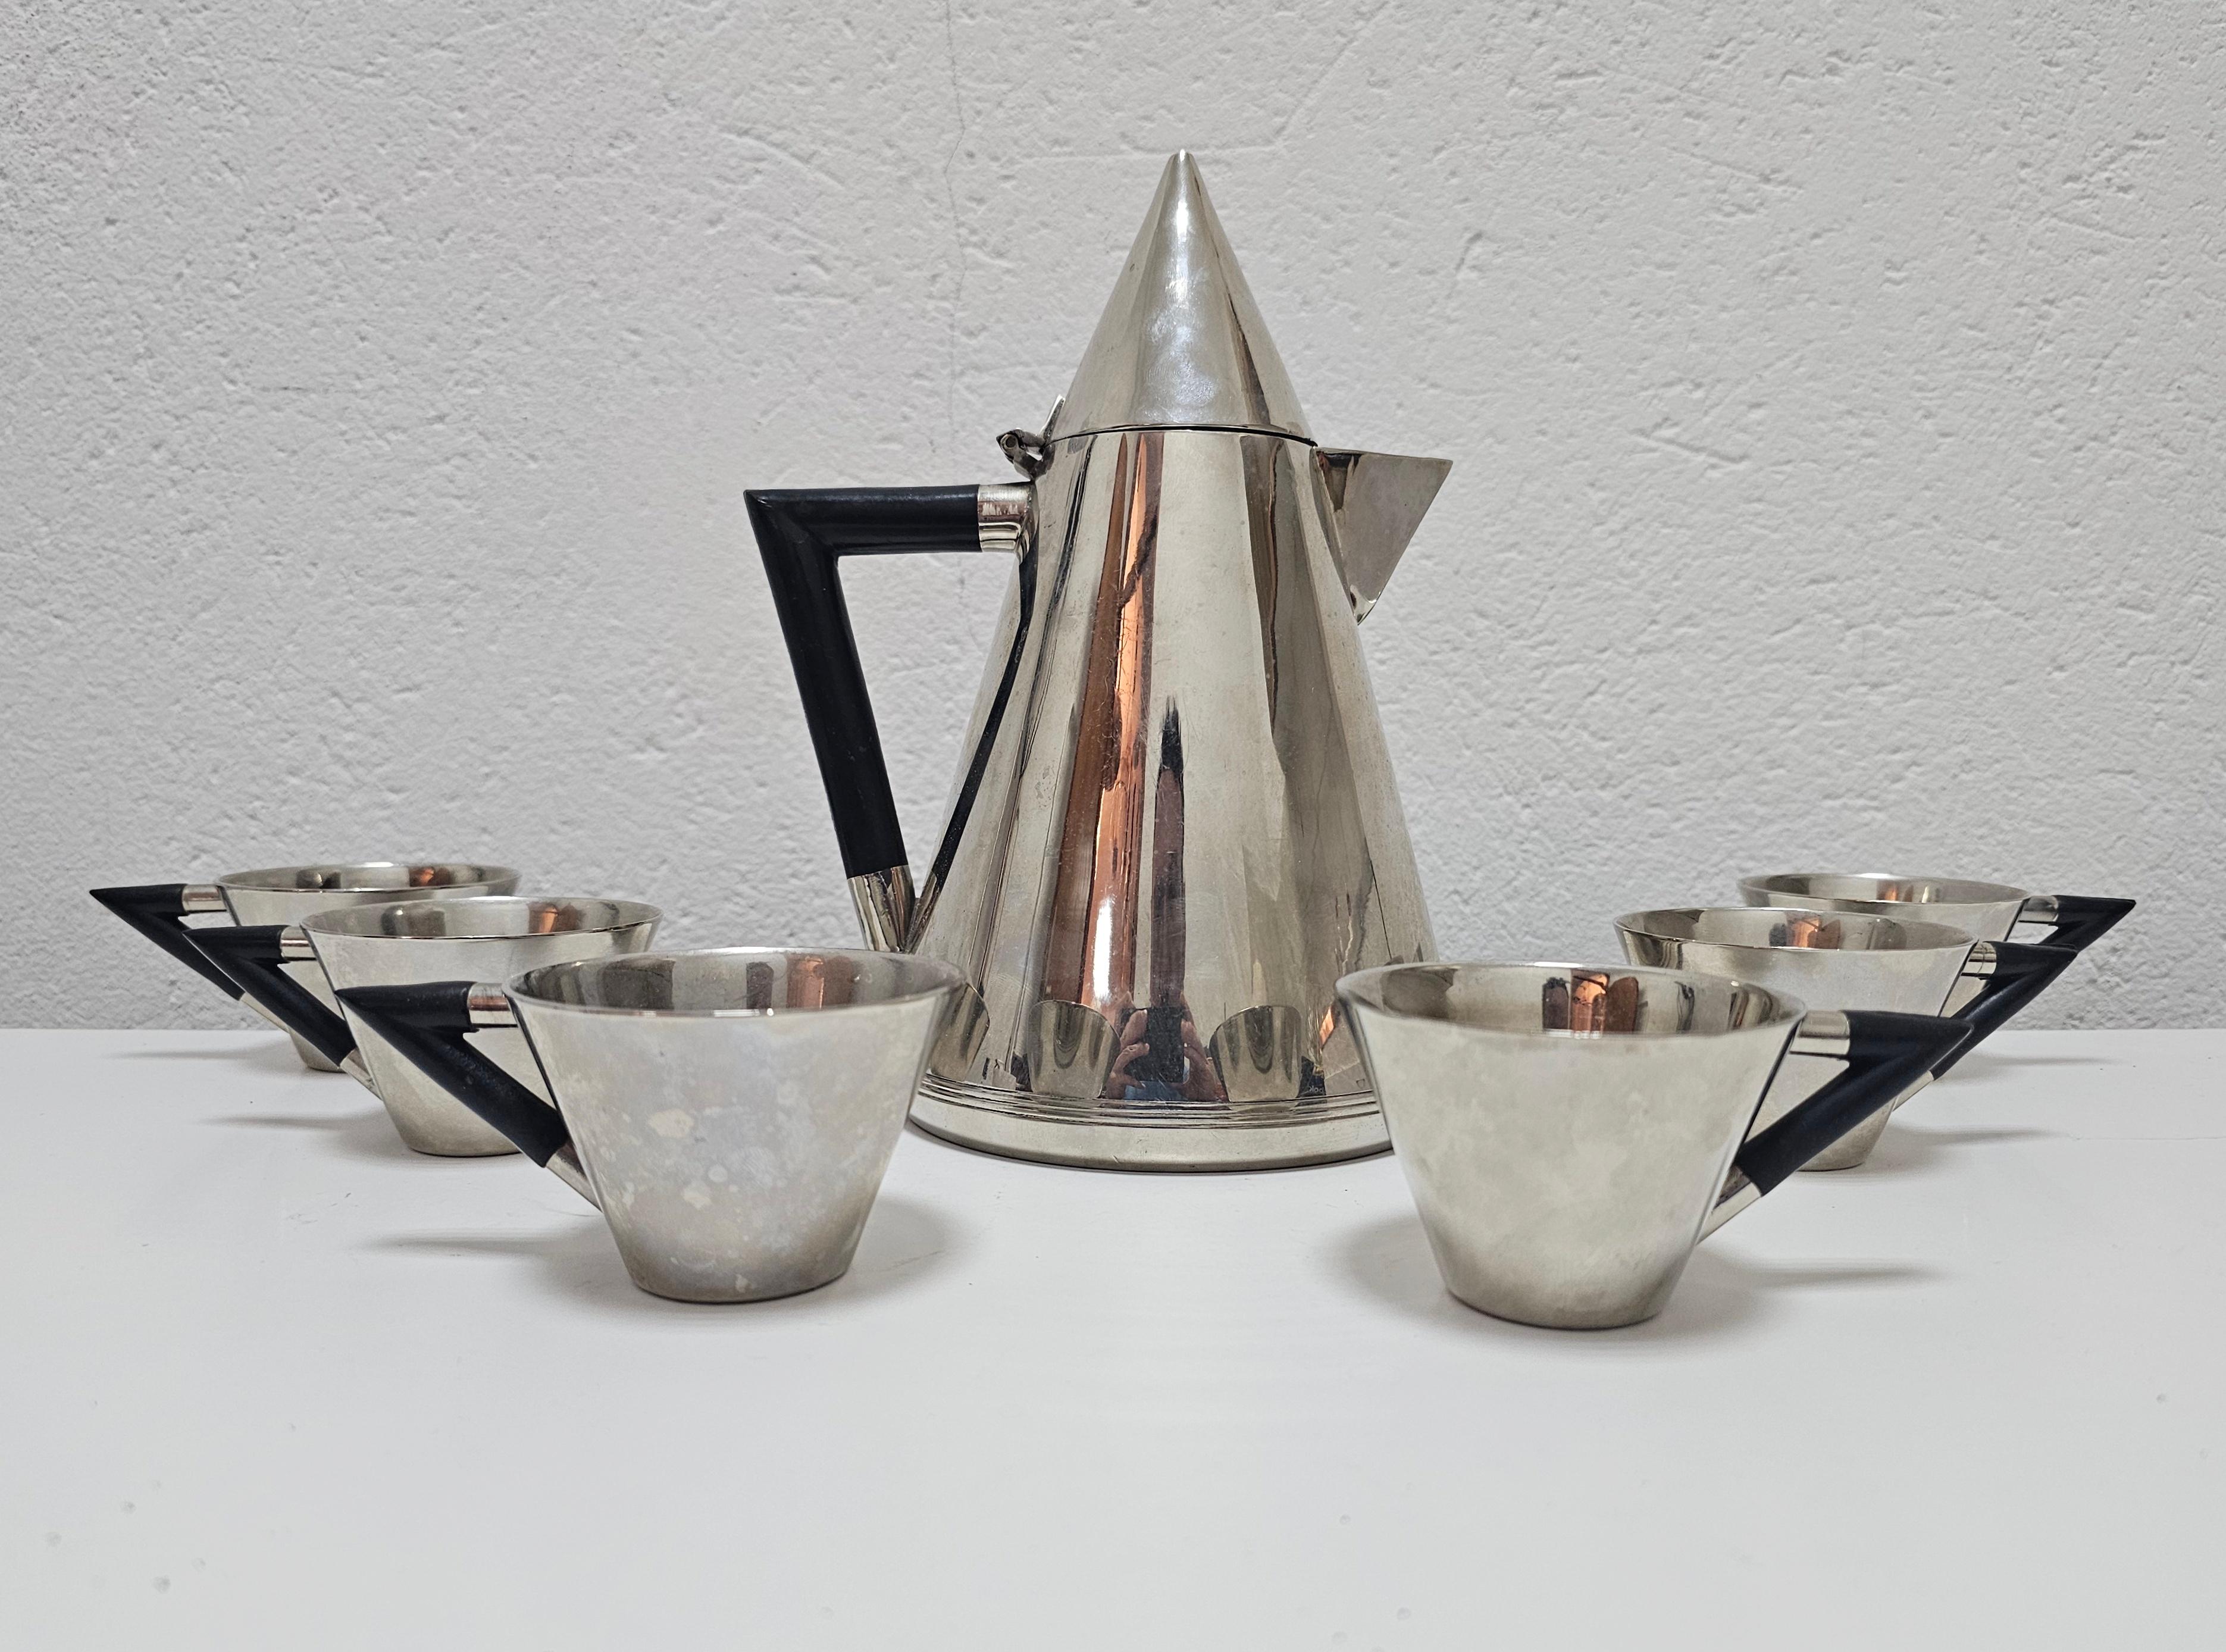 In this listing you can find a beautiful, very rare Art Deco coffee set, consisting of 7 pieces - a serving pot and 6 cups. Crafted with precision, this conical-shaped coffee pot boasts a lustrous silver plated sophistication and charm. The handle,